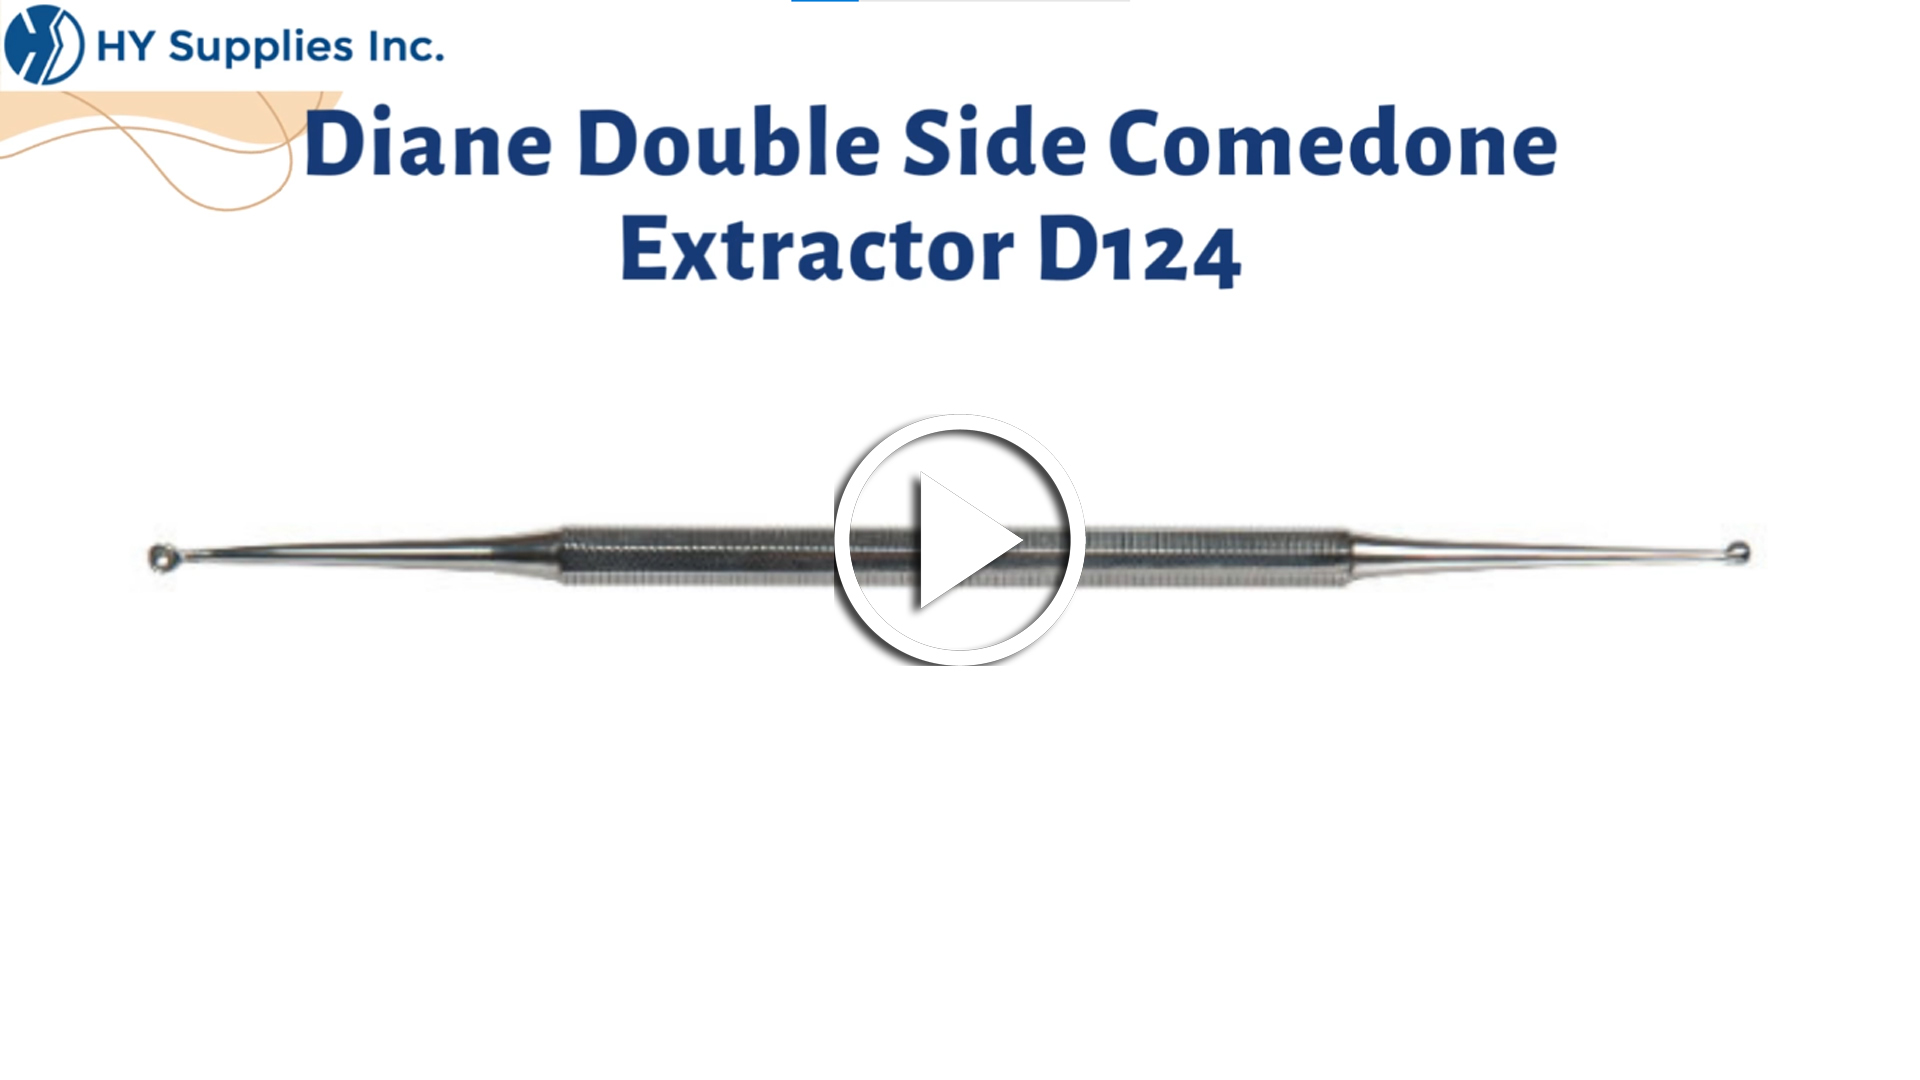 Diane Double Side Comedone Extractor D124